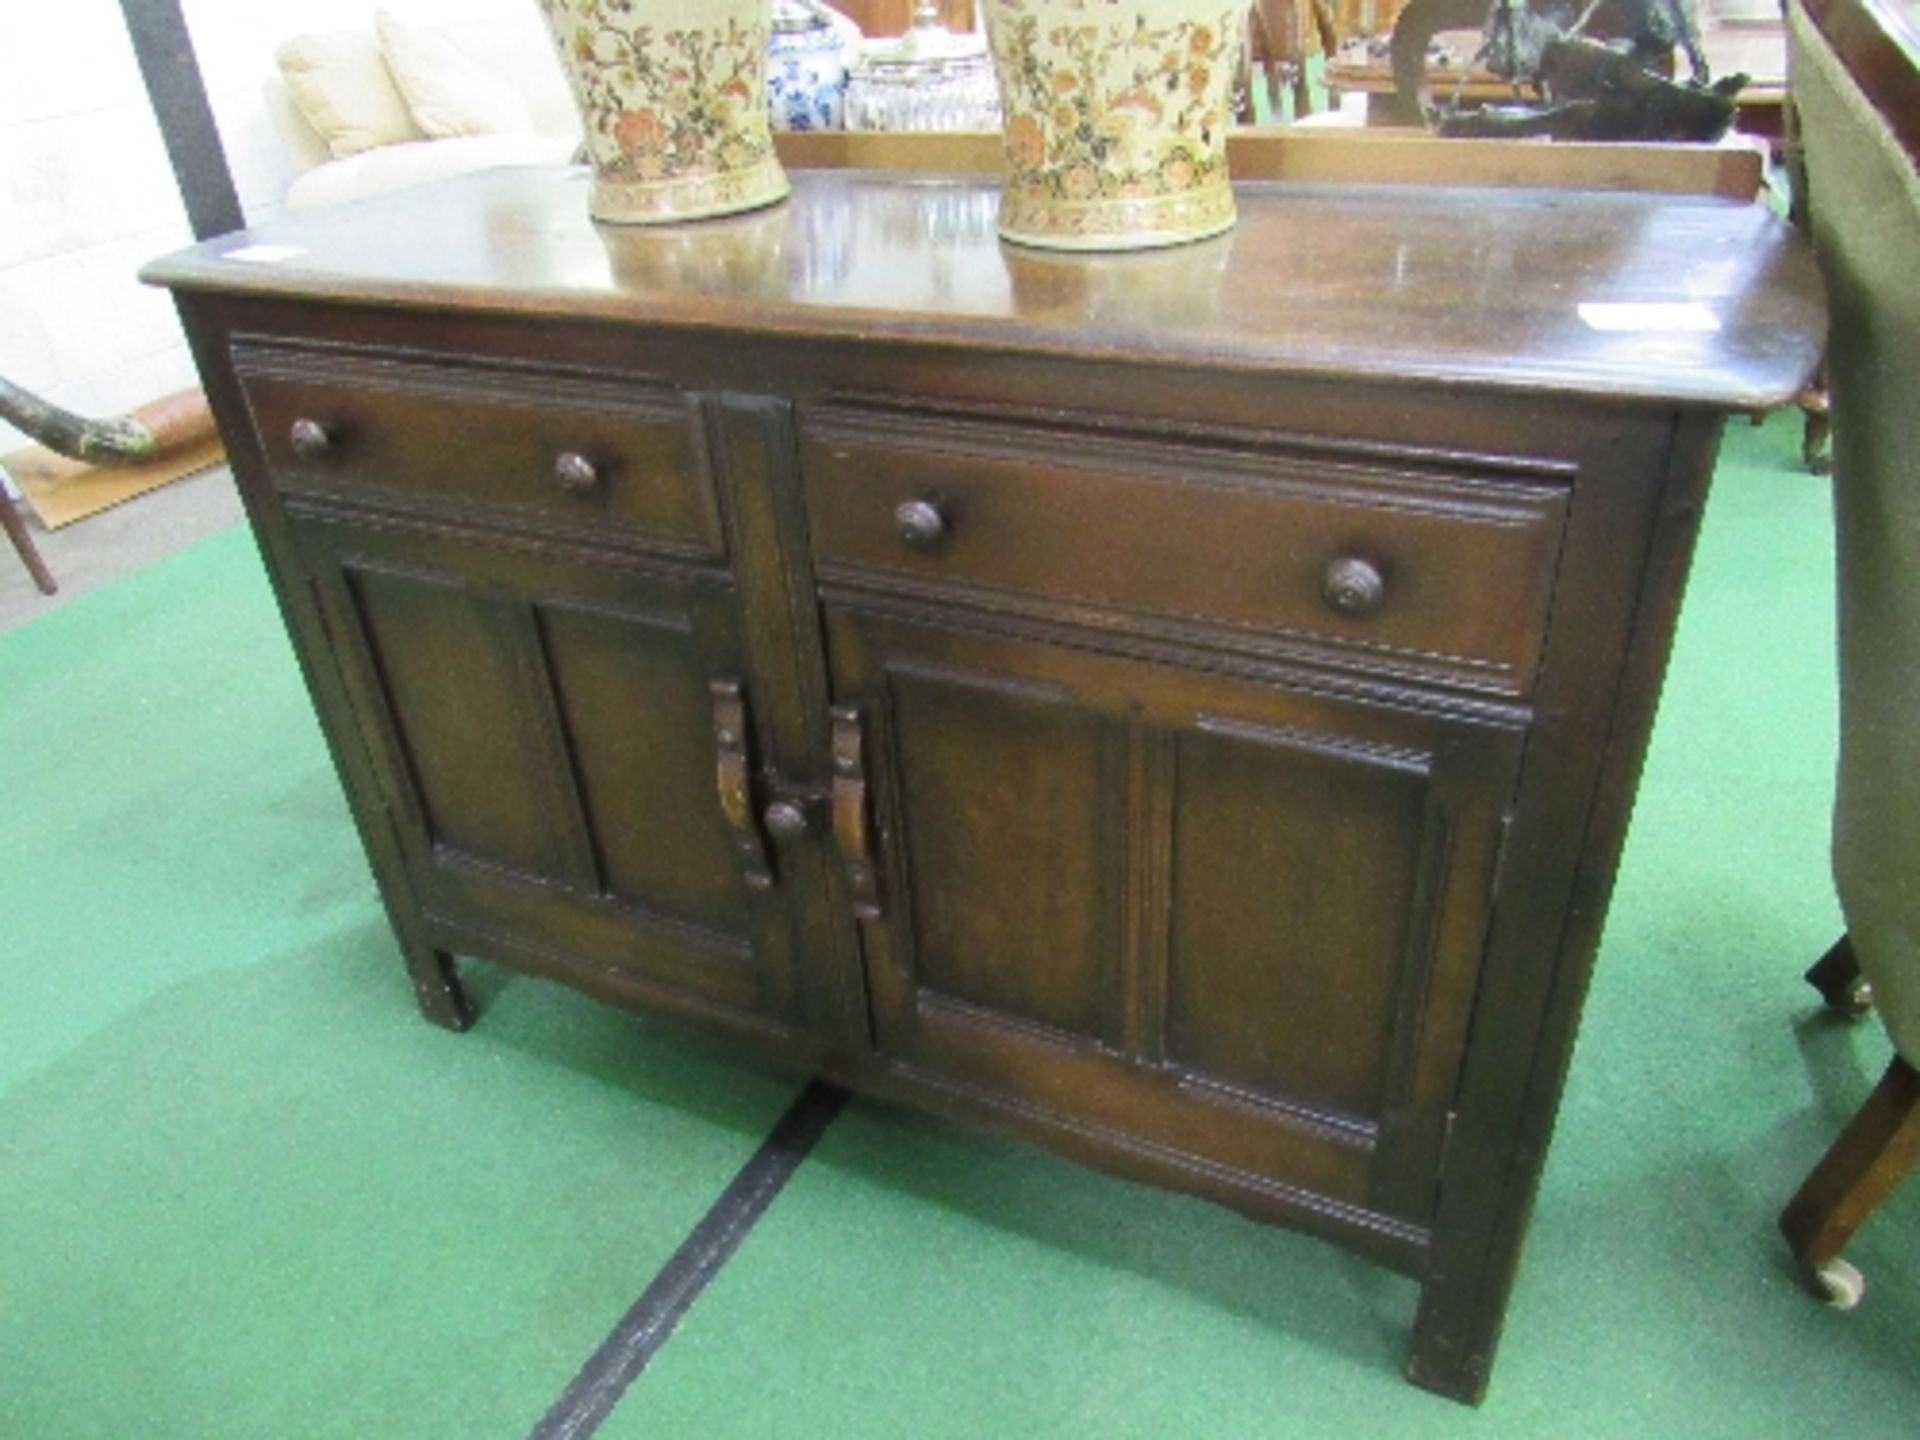 Ercol-style sideboard, 202cms x 45cms x 84cms. Estimate £30-50